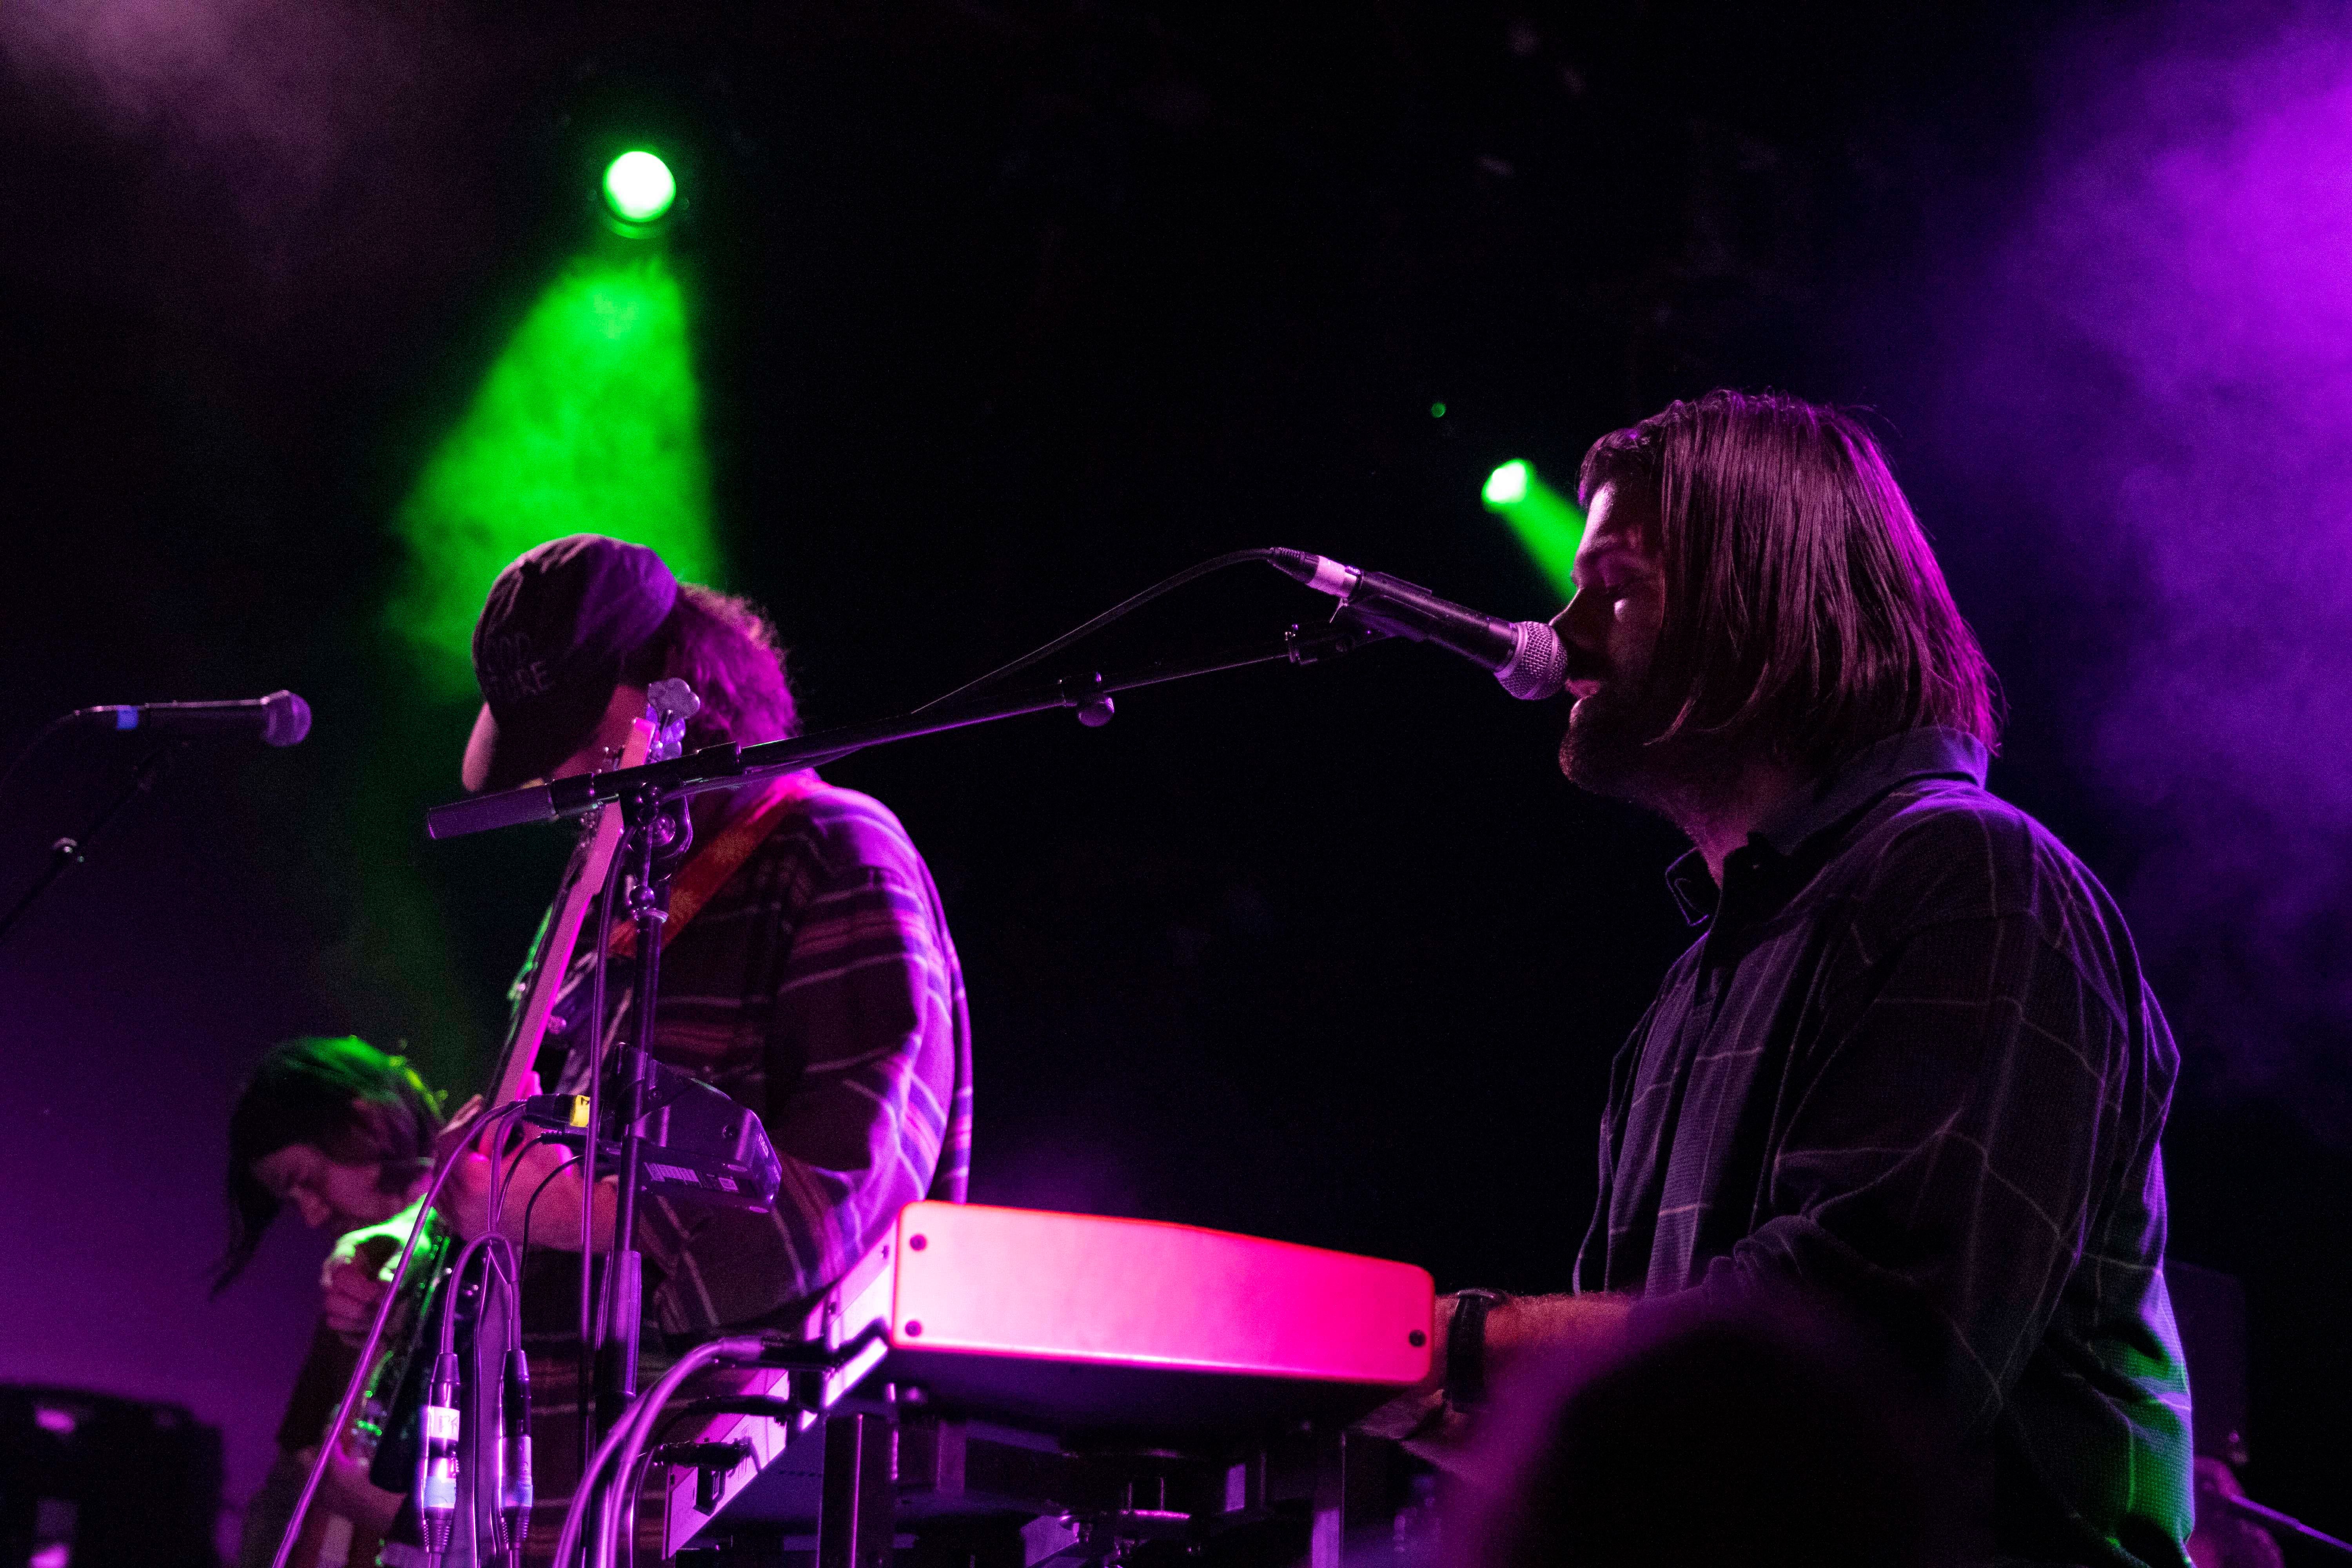 Turnover brings intimate, dreamy rock to The Sinclair